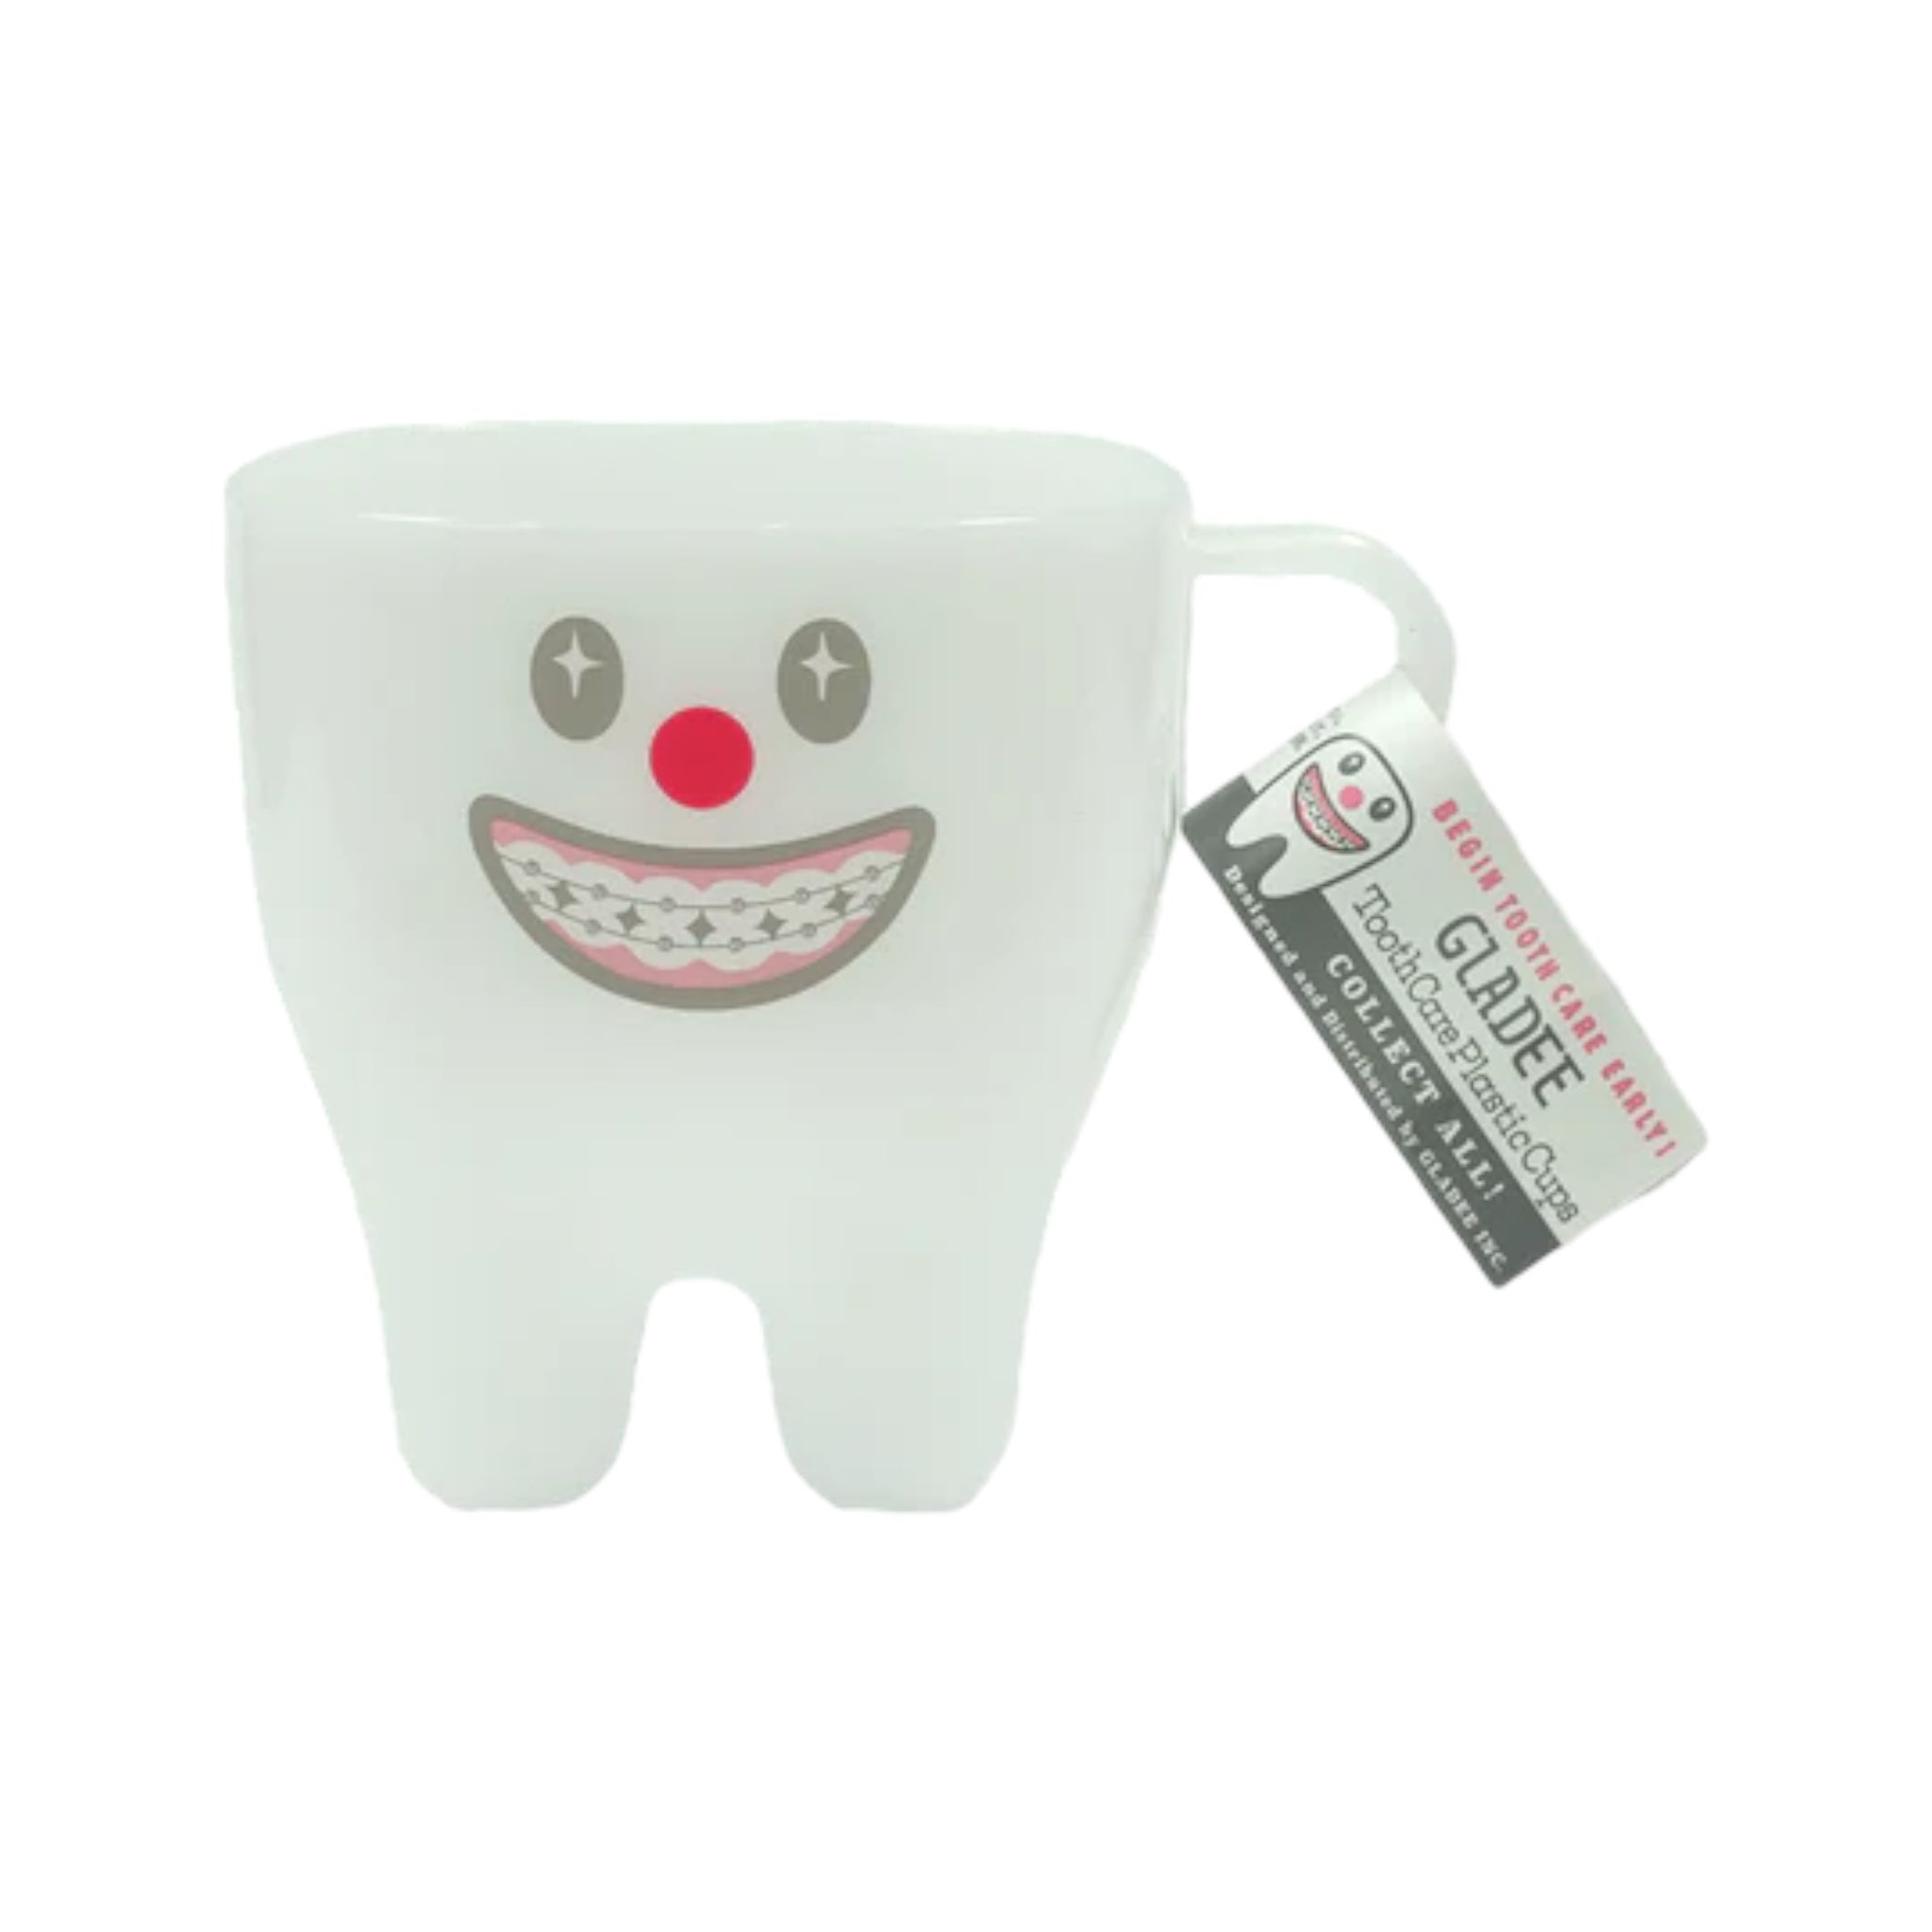 TOOTH PLASTIC CUP / STRAIGHTENING